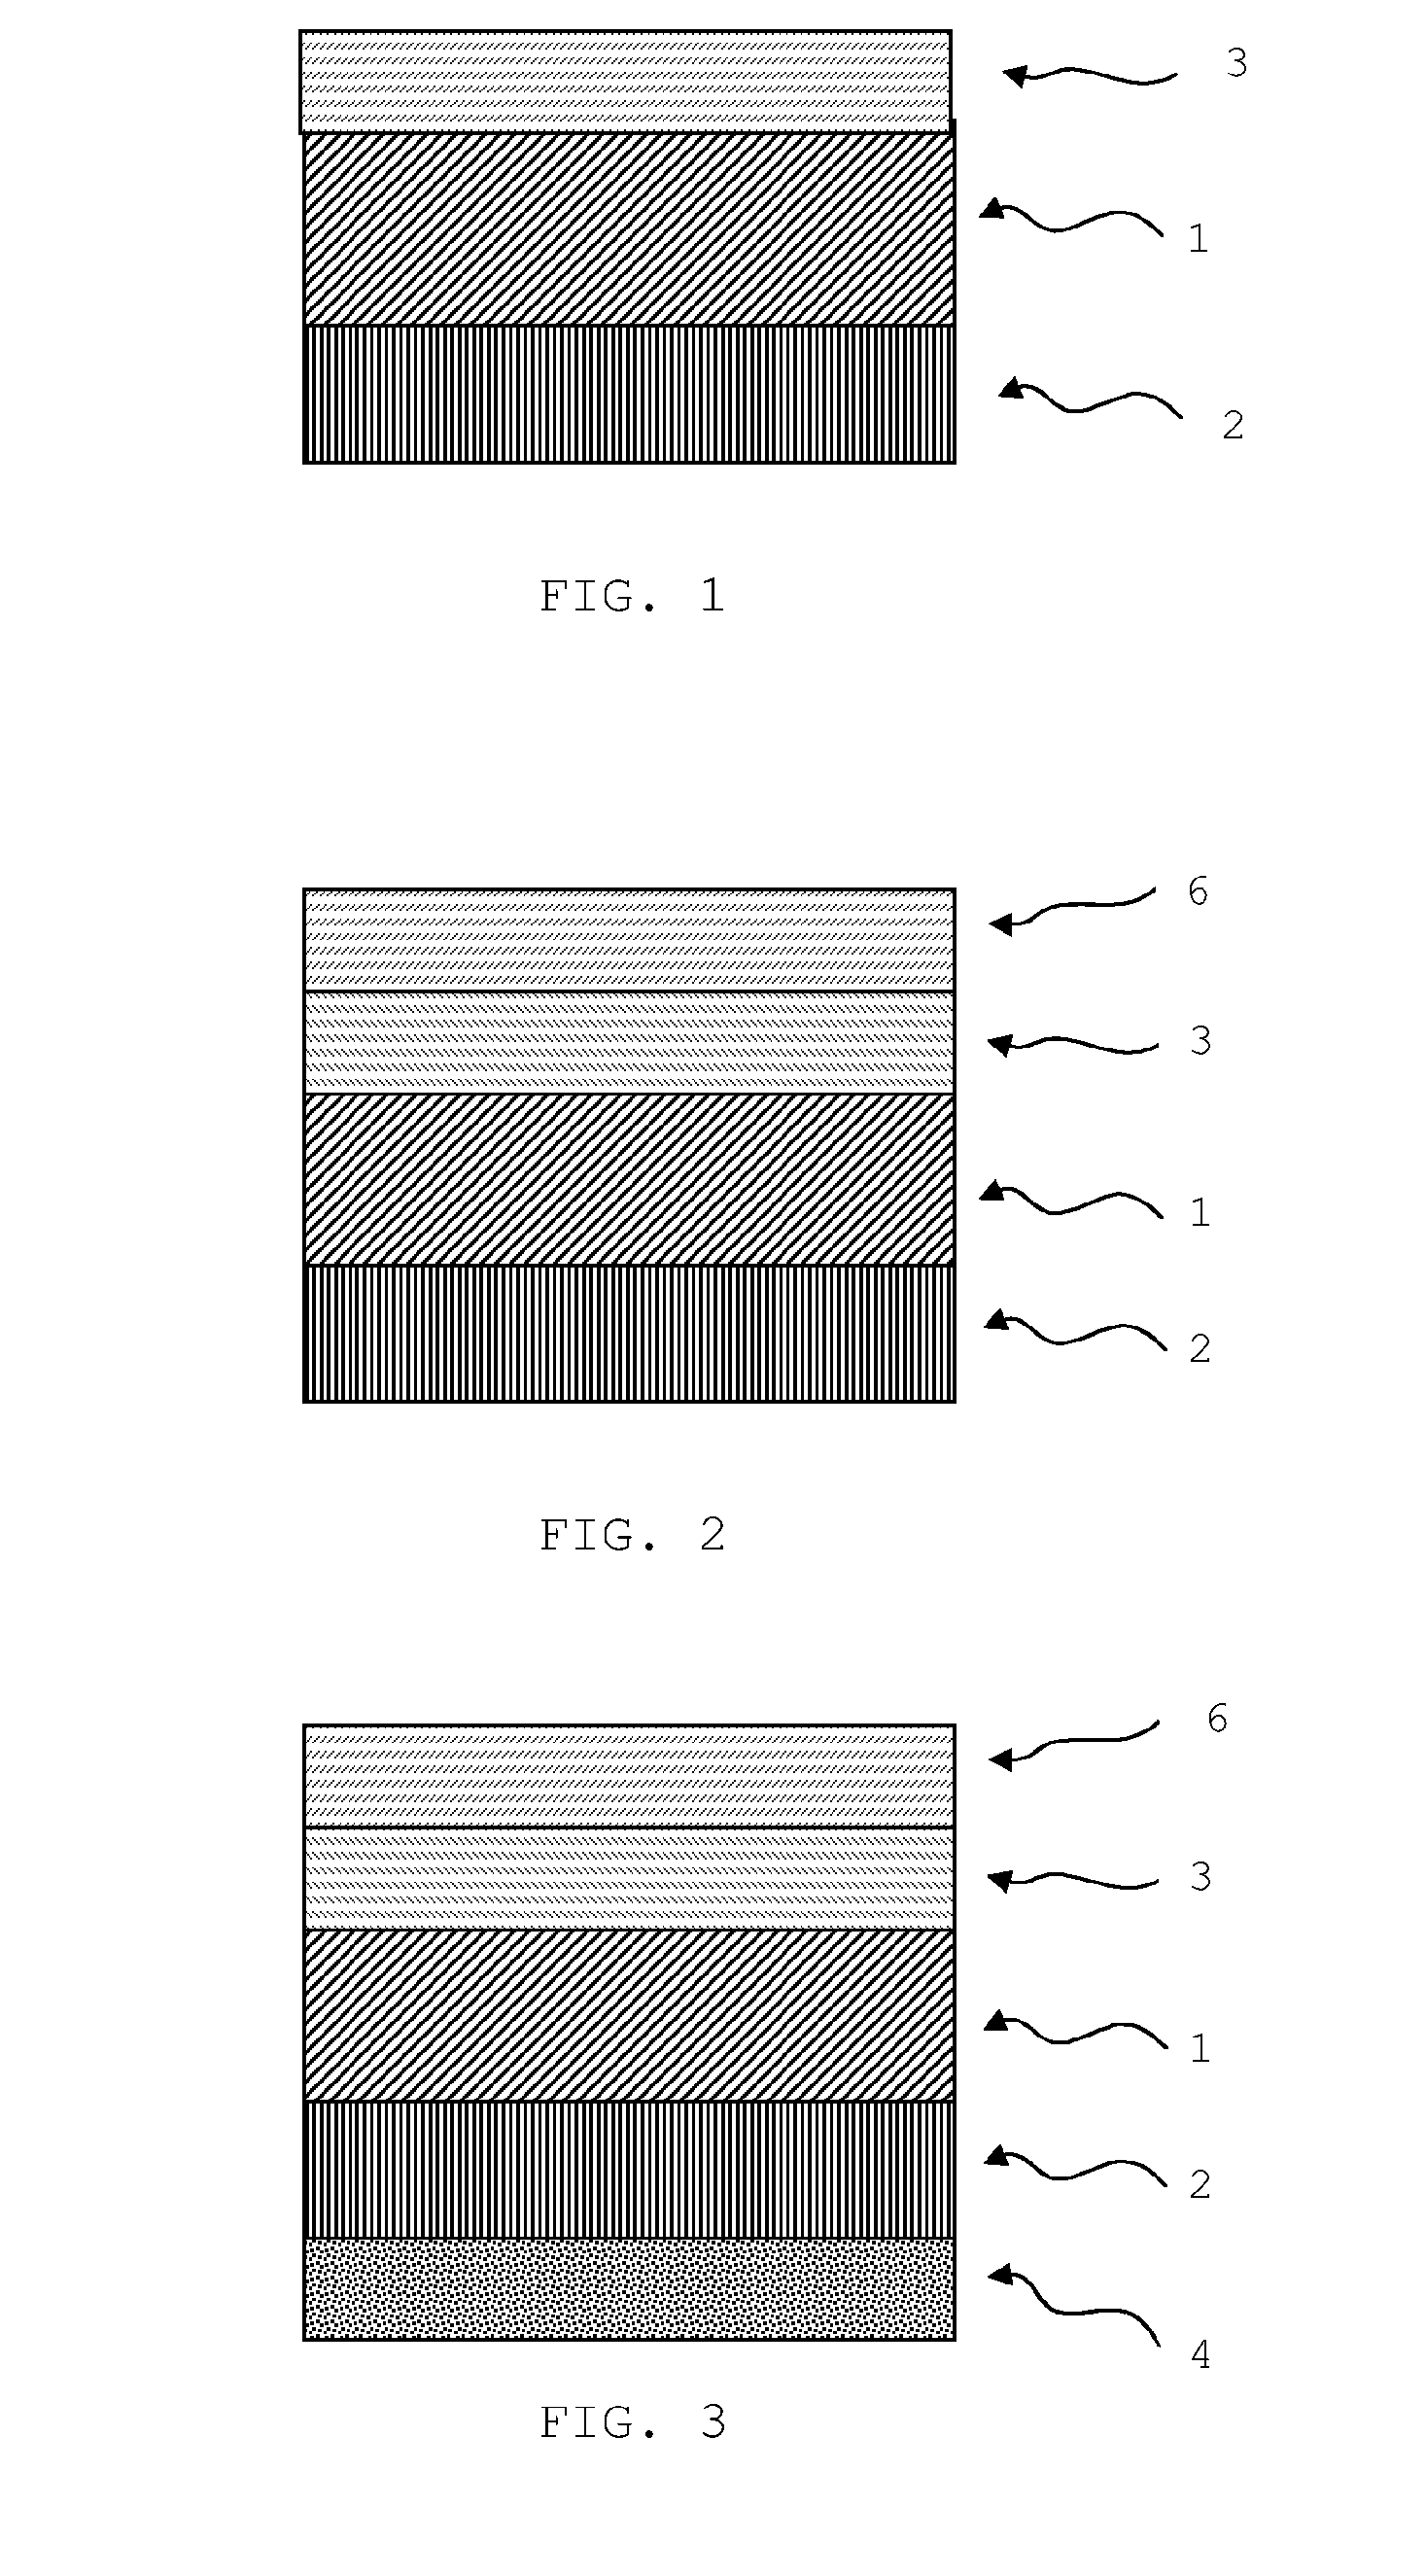 Solar selective absorber based on double nitride composite material and process for its preparation